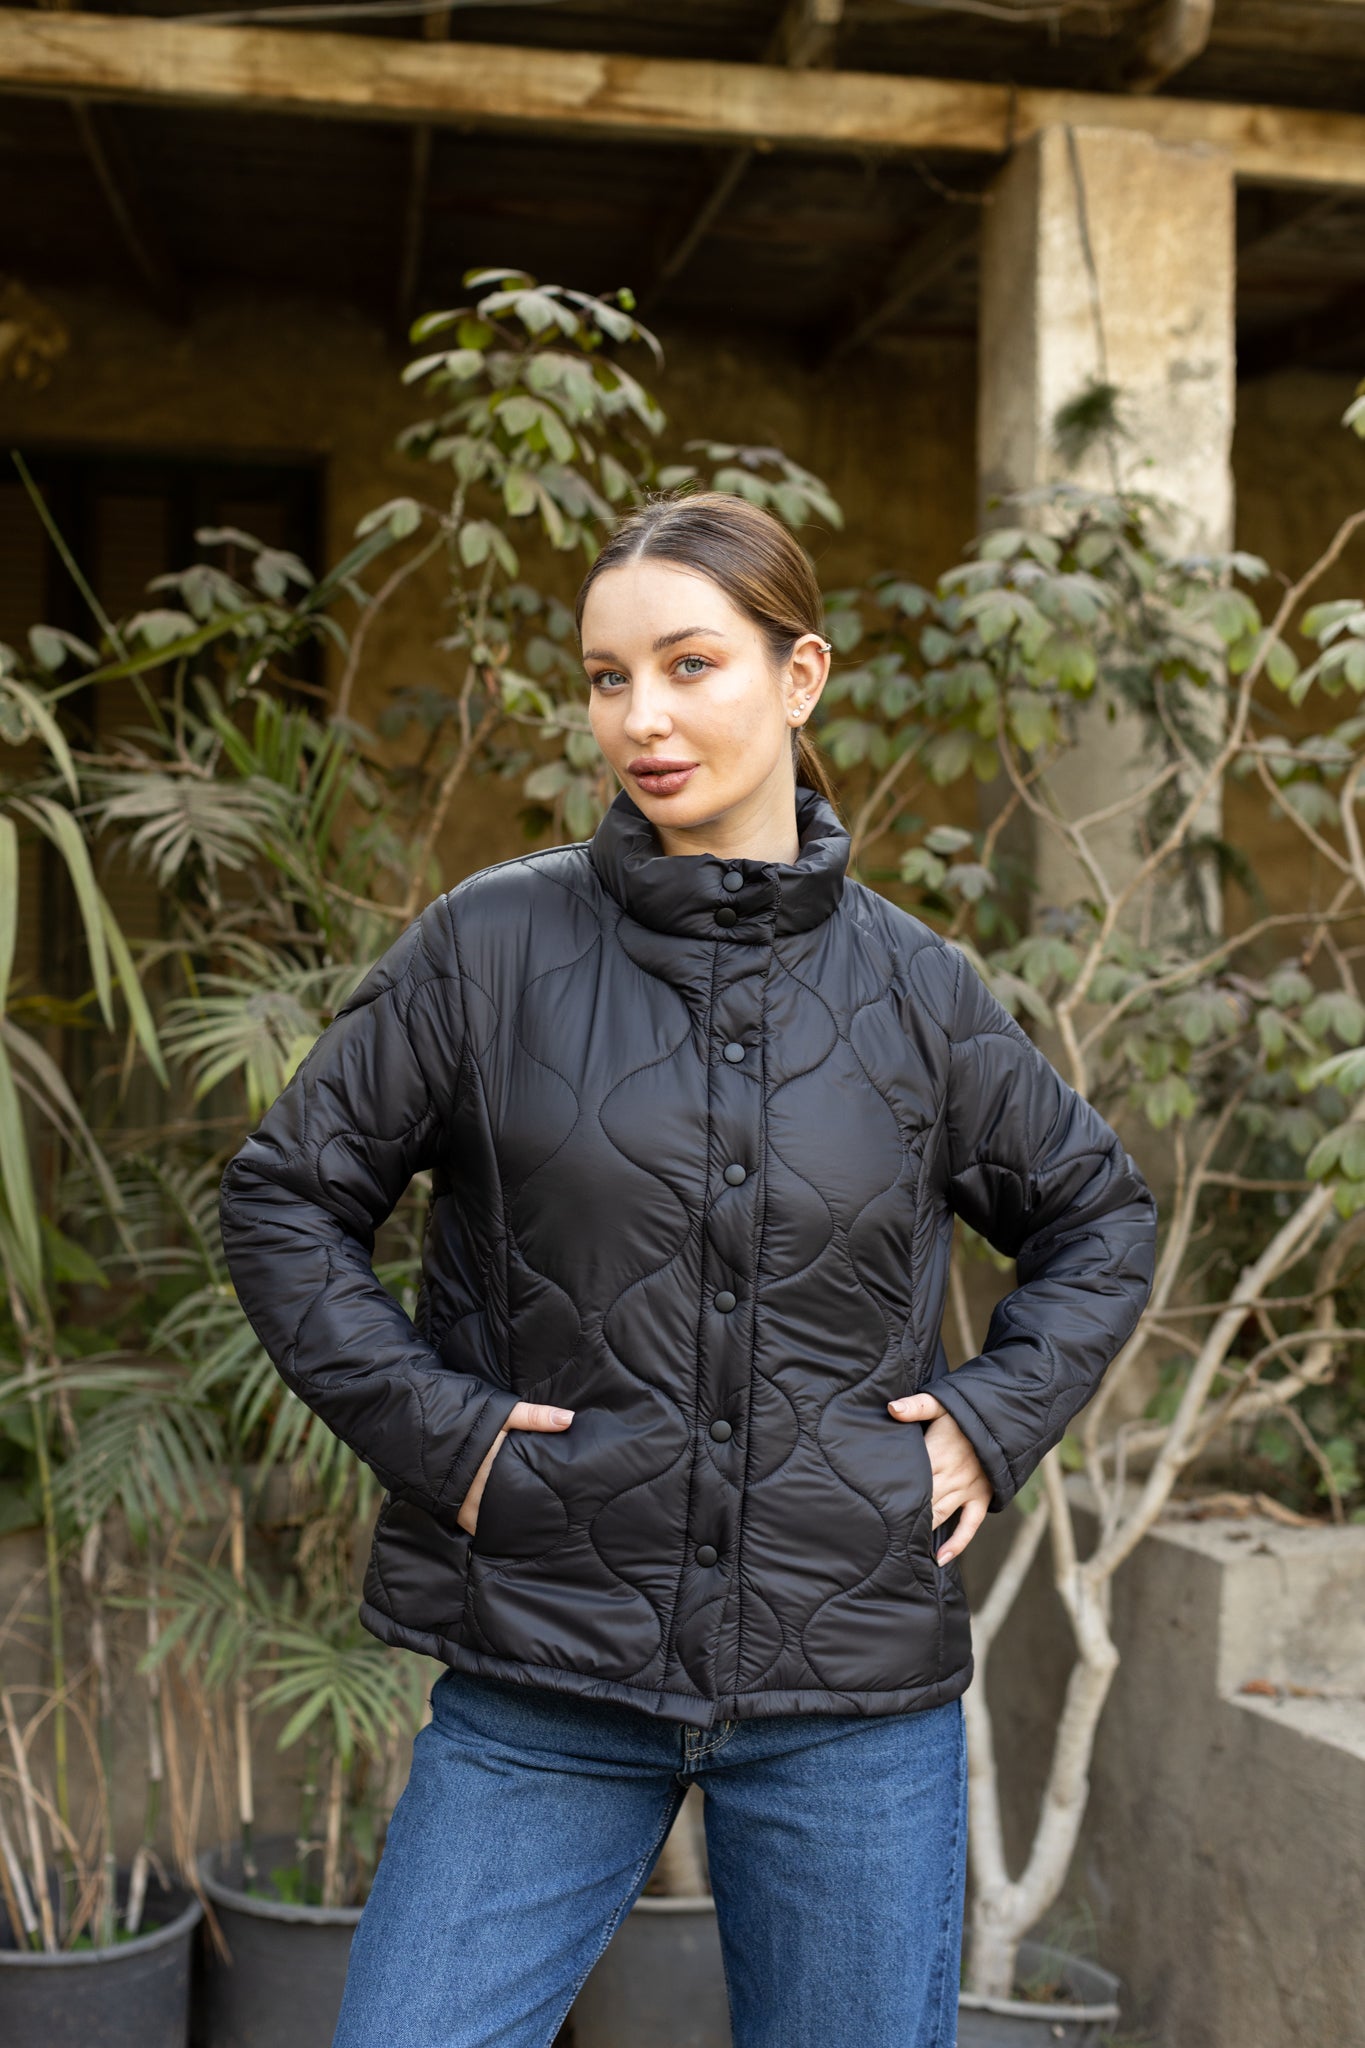 Hour glass quilted nylon jacket with snaps -150026